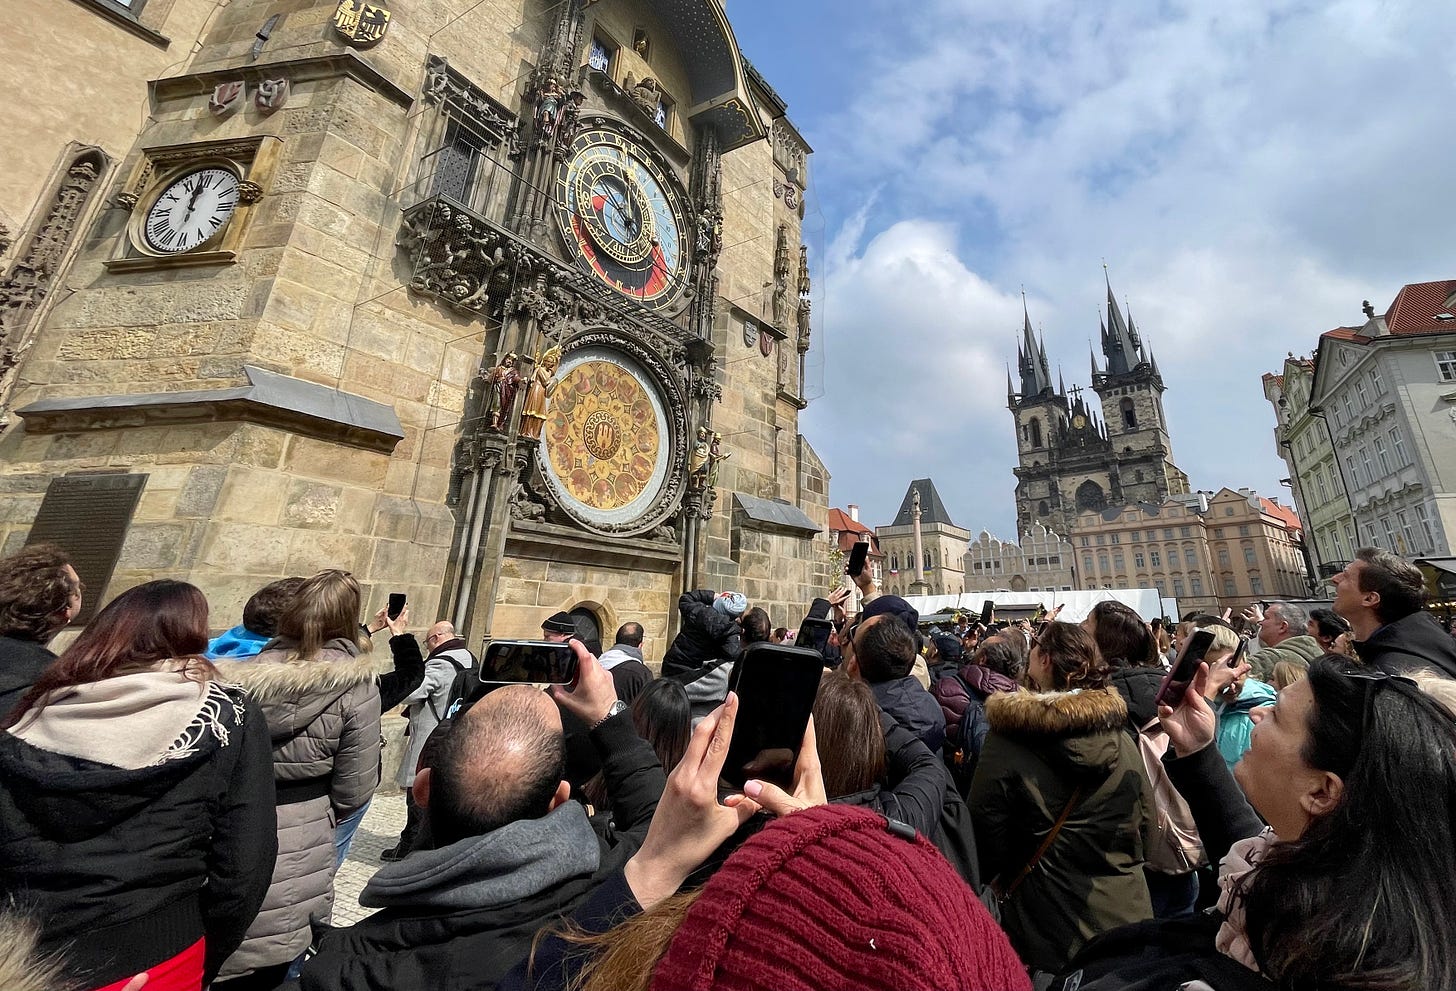 Crowds wait for the clock to strike the hour in Prague